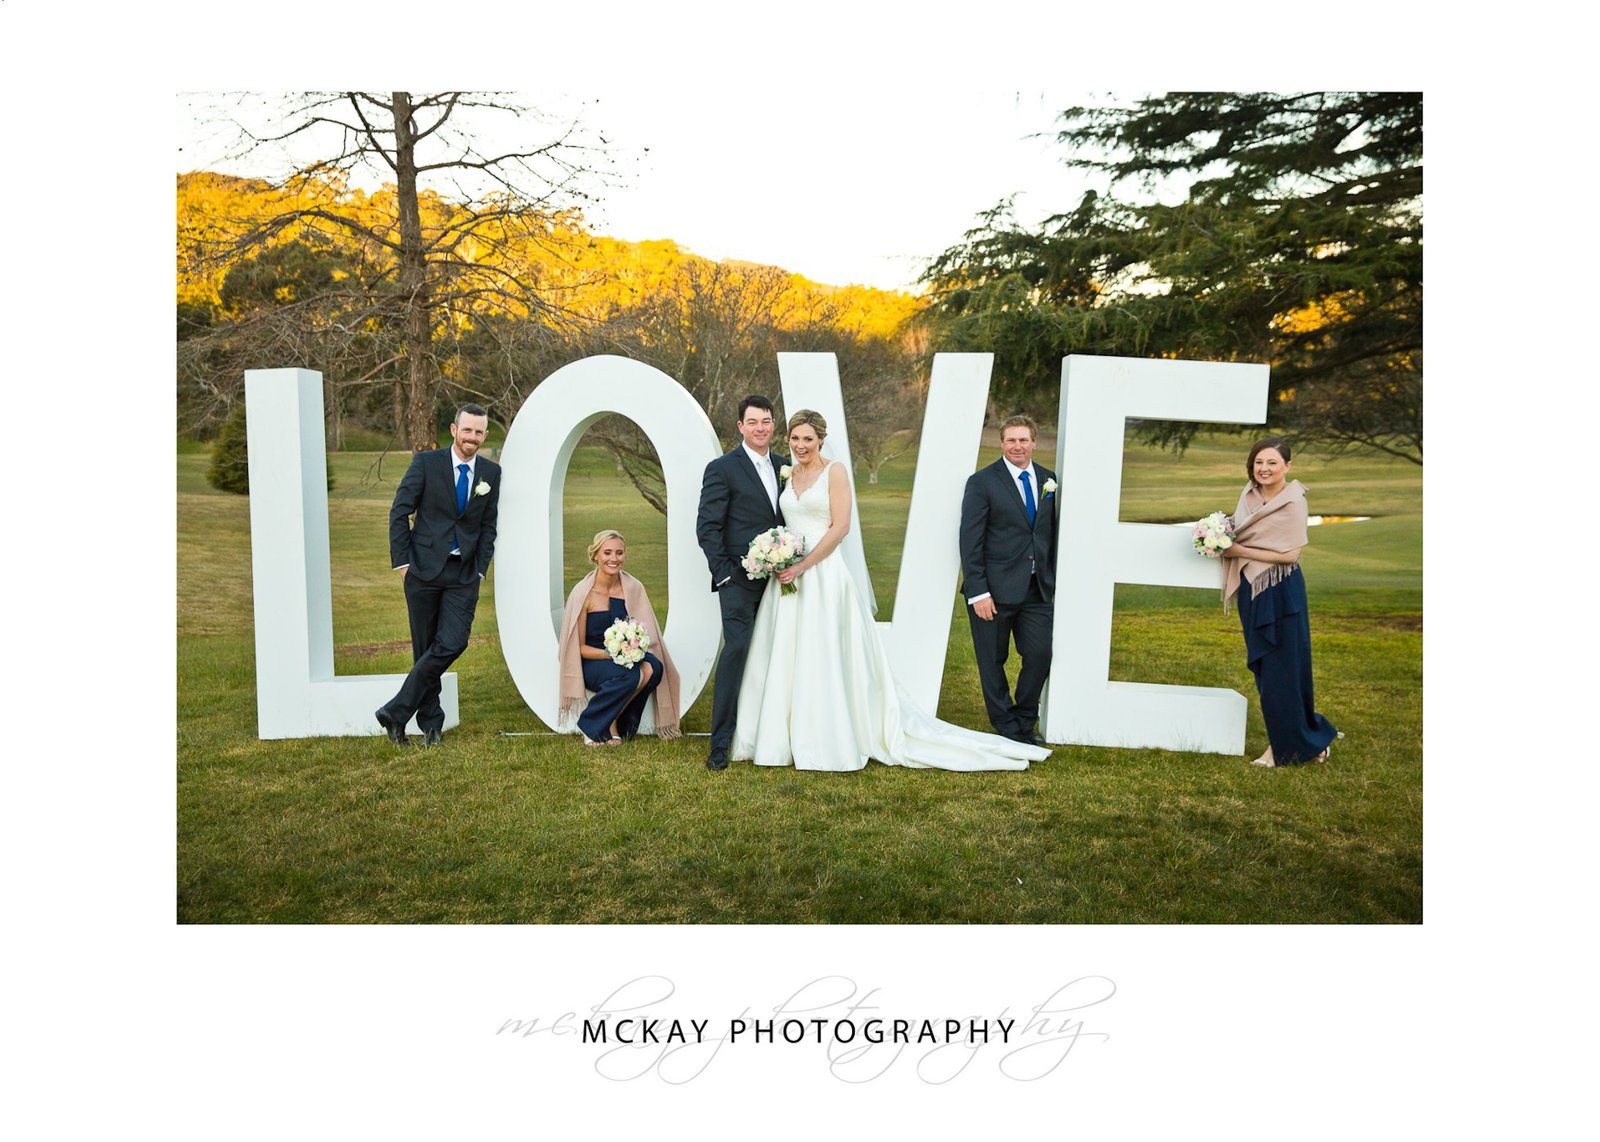 Bridal party and LOVE sign letters